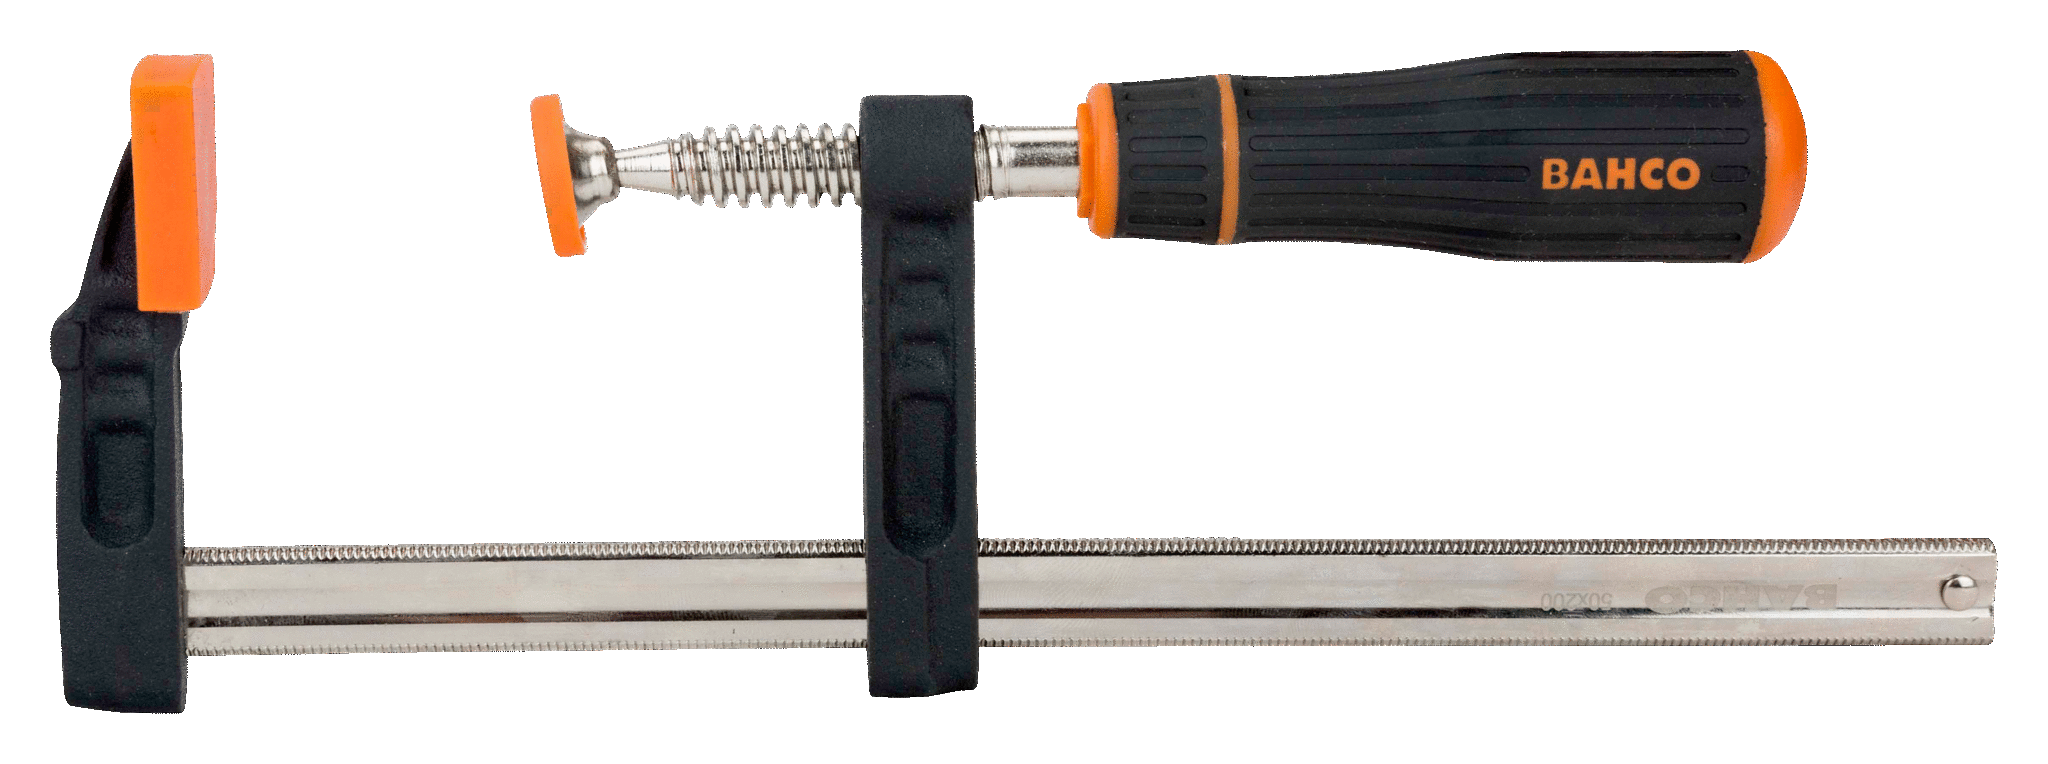 F-Clamps with Rubberised Handle - 420SH-120-400 by Bahco